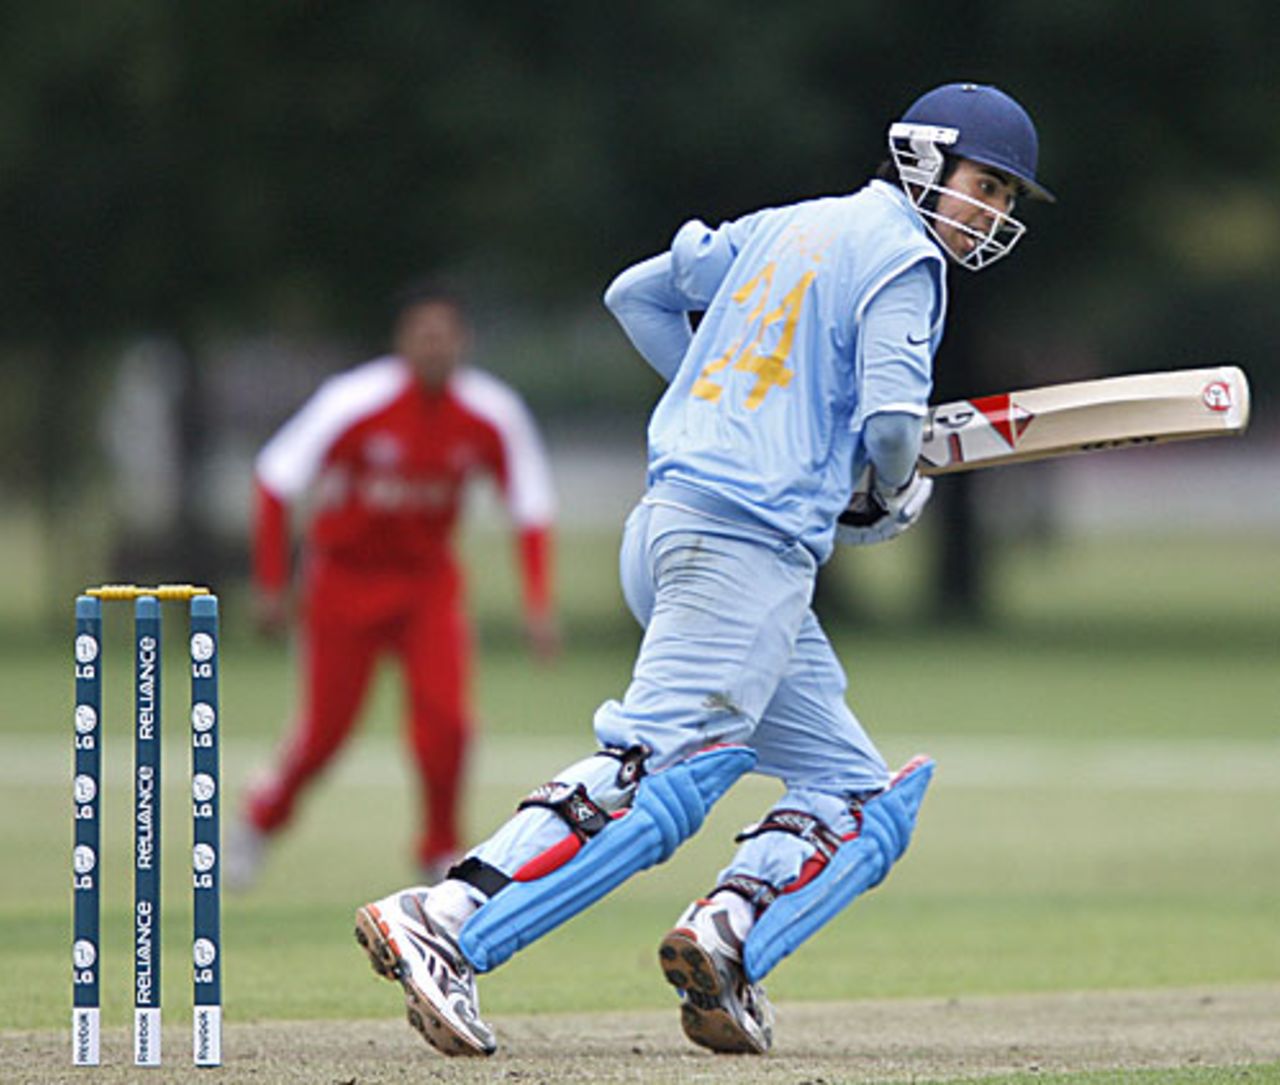 KL Rahul made an unbeaten 62 for India, India Under-19s v Hong Kong Under-19s, 11th Match, Group A, ICC Under-19 World Cup, Christchurch, January 17, 2010